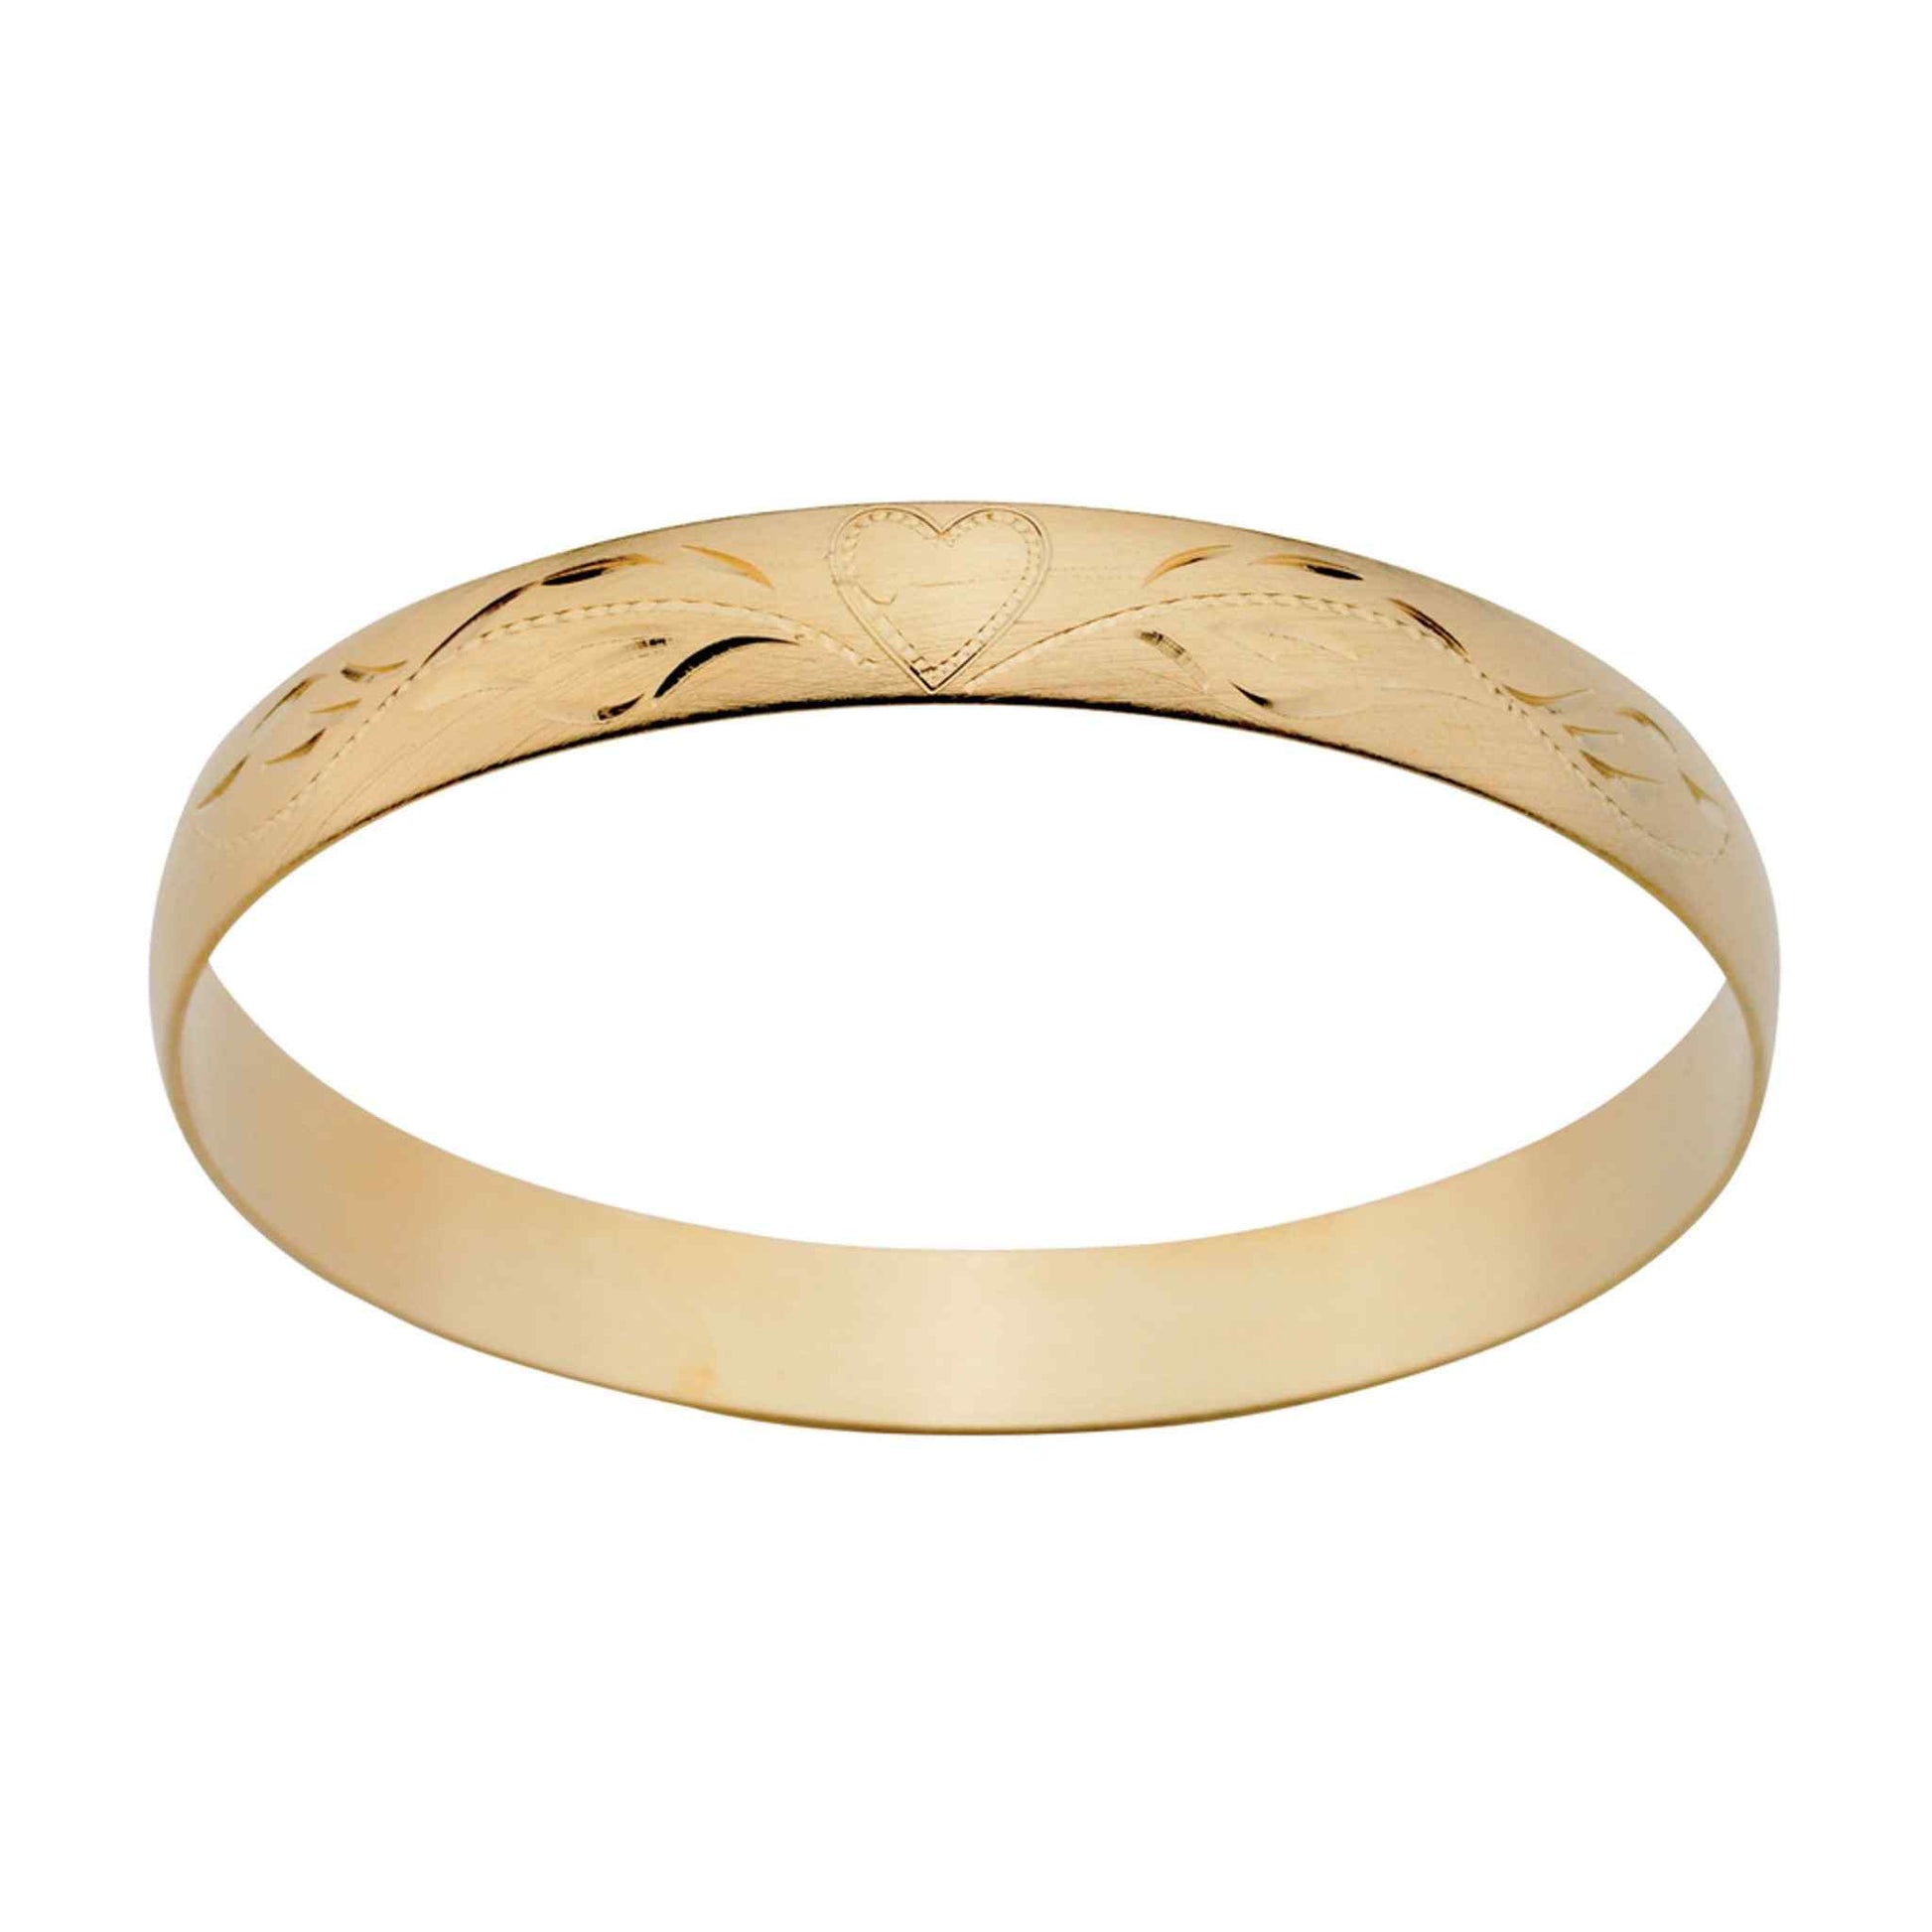 A 3/8" bangle bracelet with hand engraving displayed on a neutral white background.